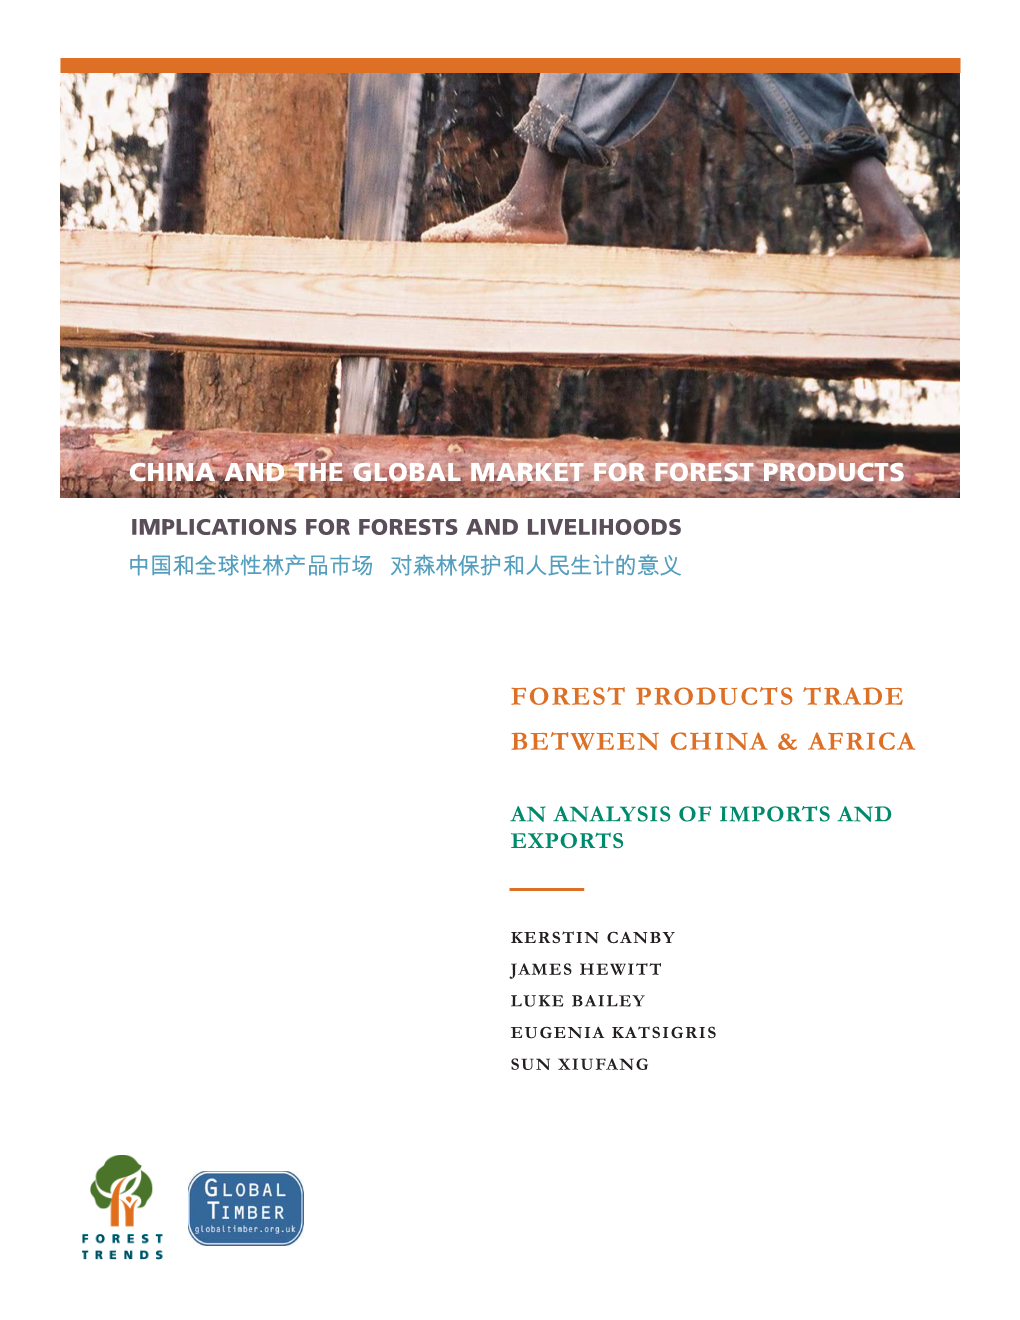 Forest Products Trade Between China & Africa